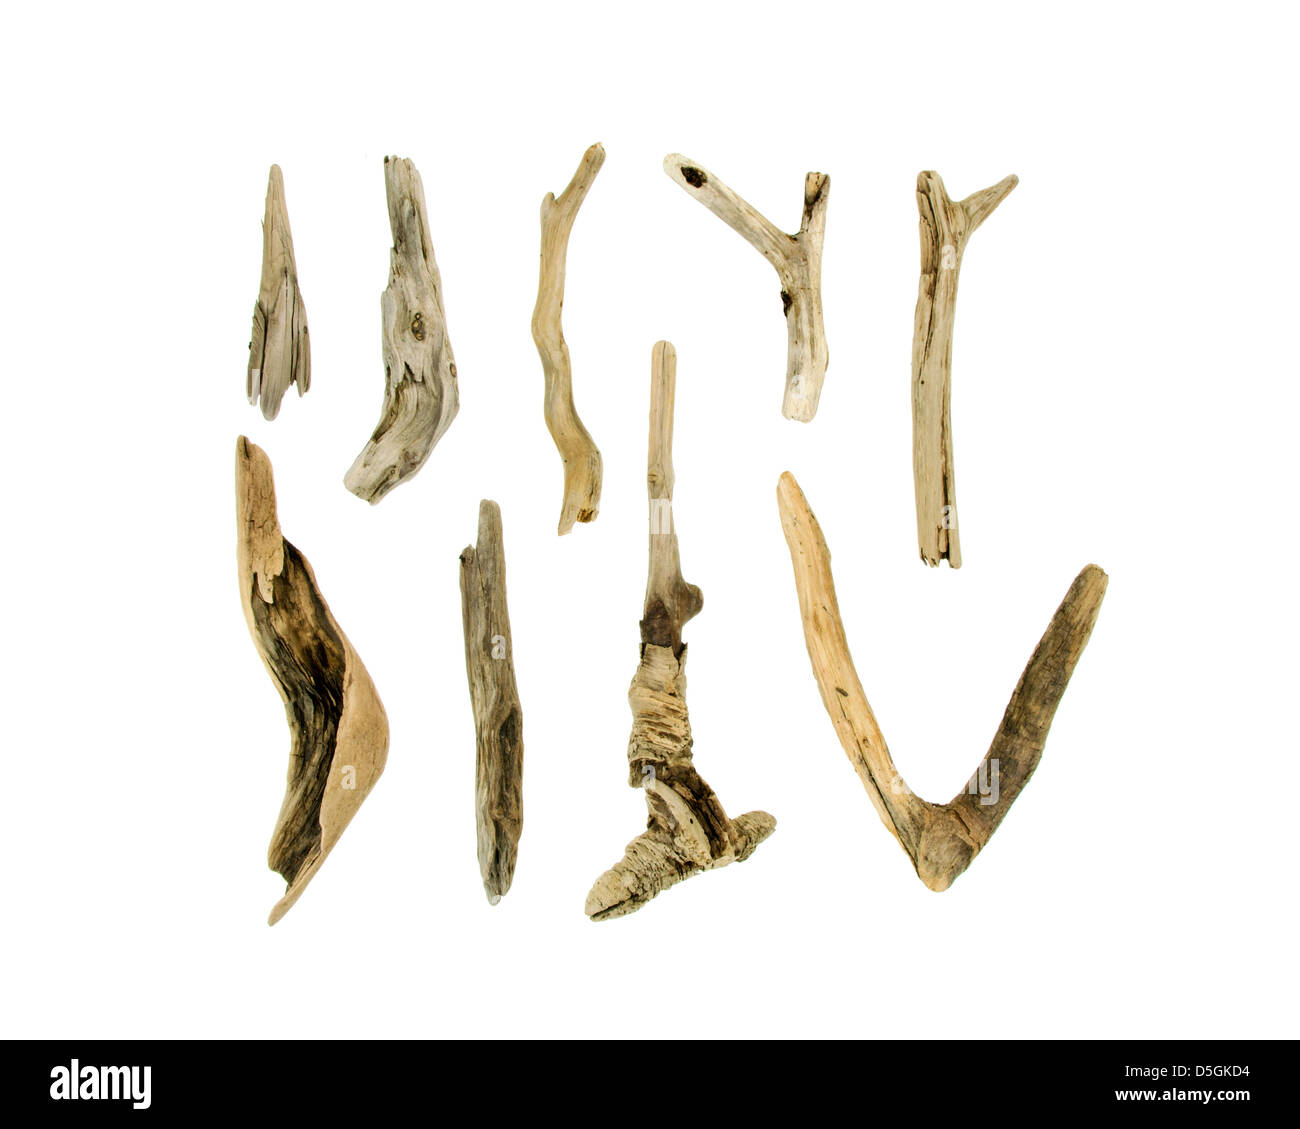 Nine pieces of Maine driftwood on a white background. Stock Photo